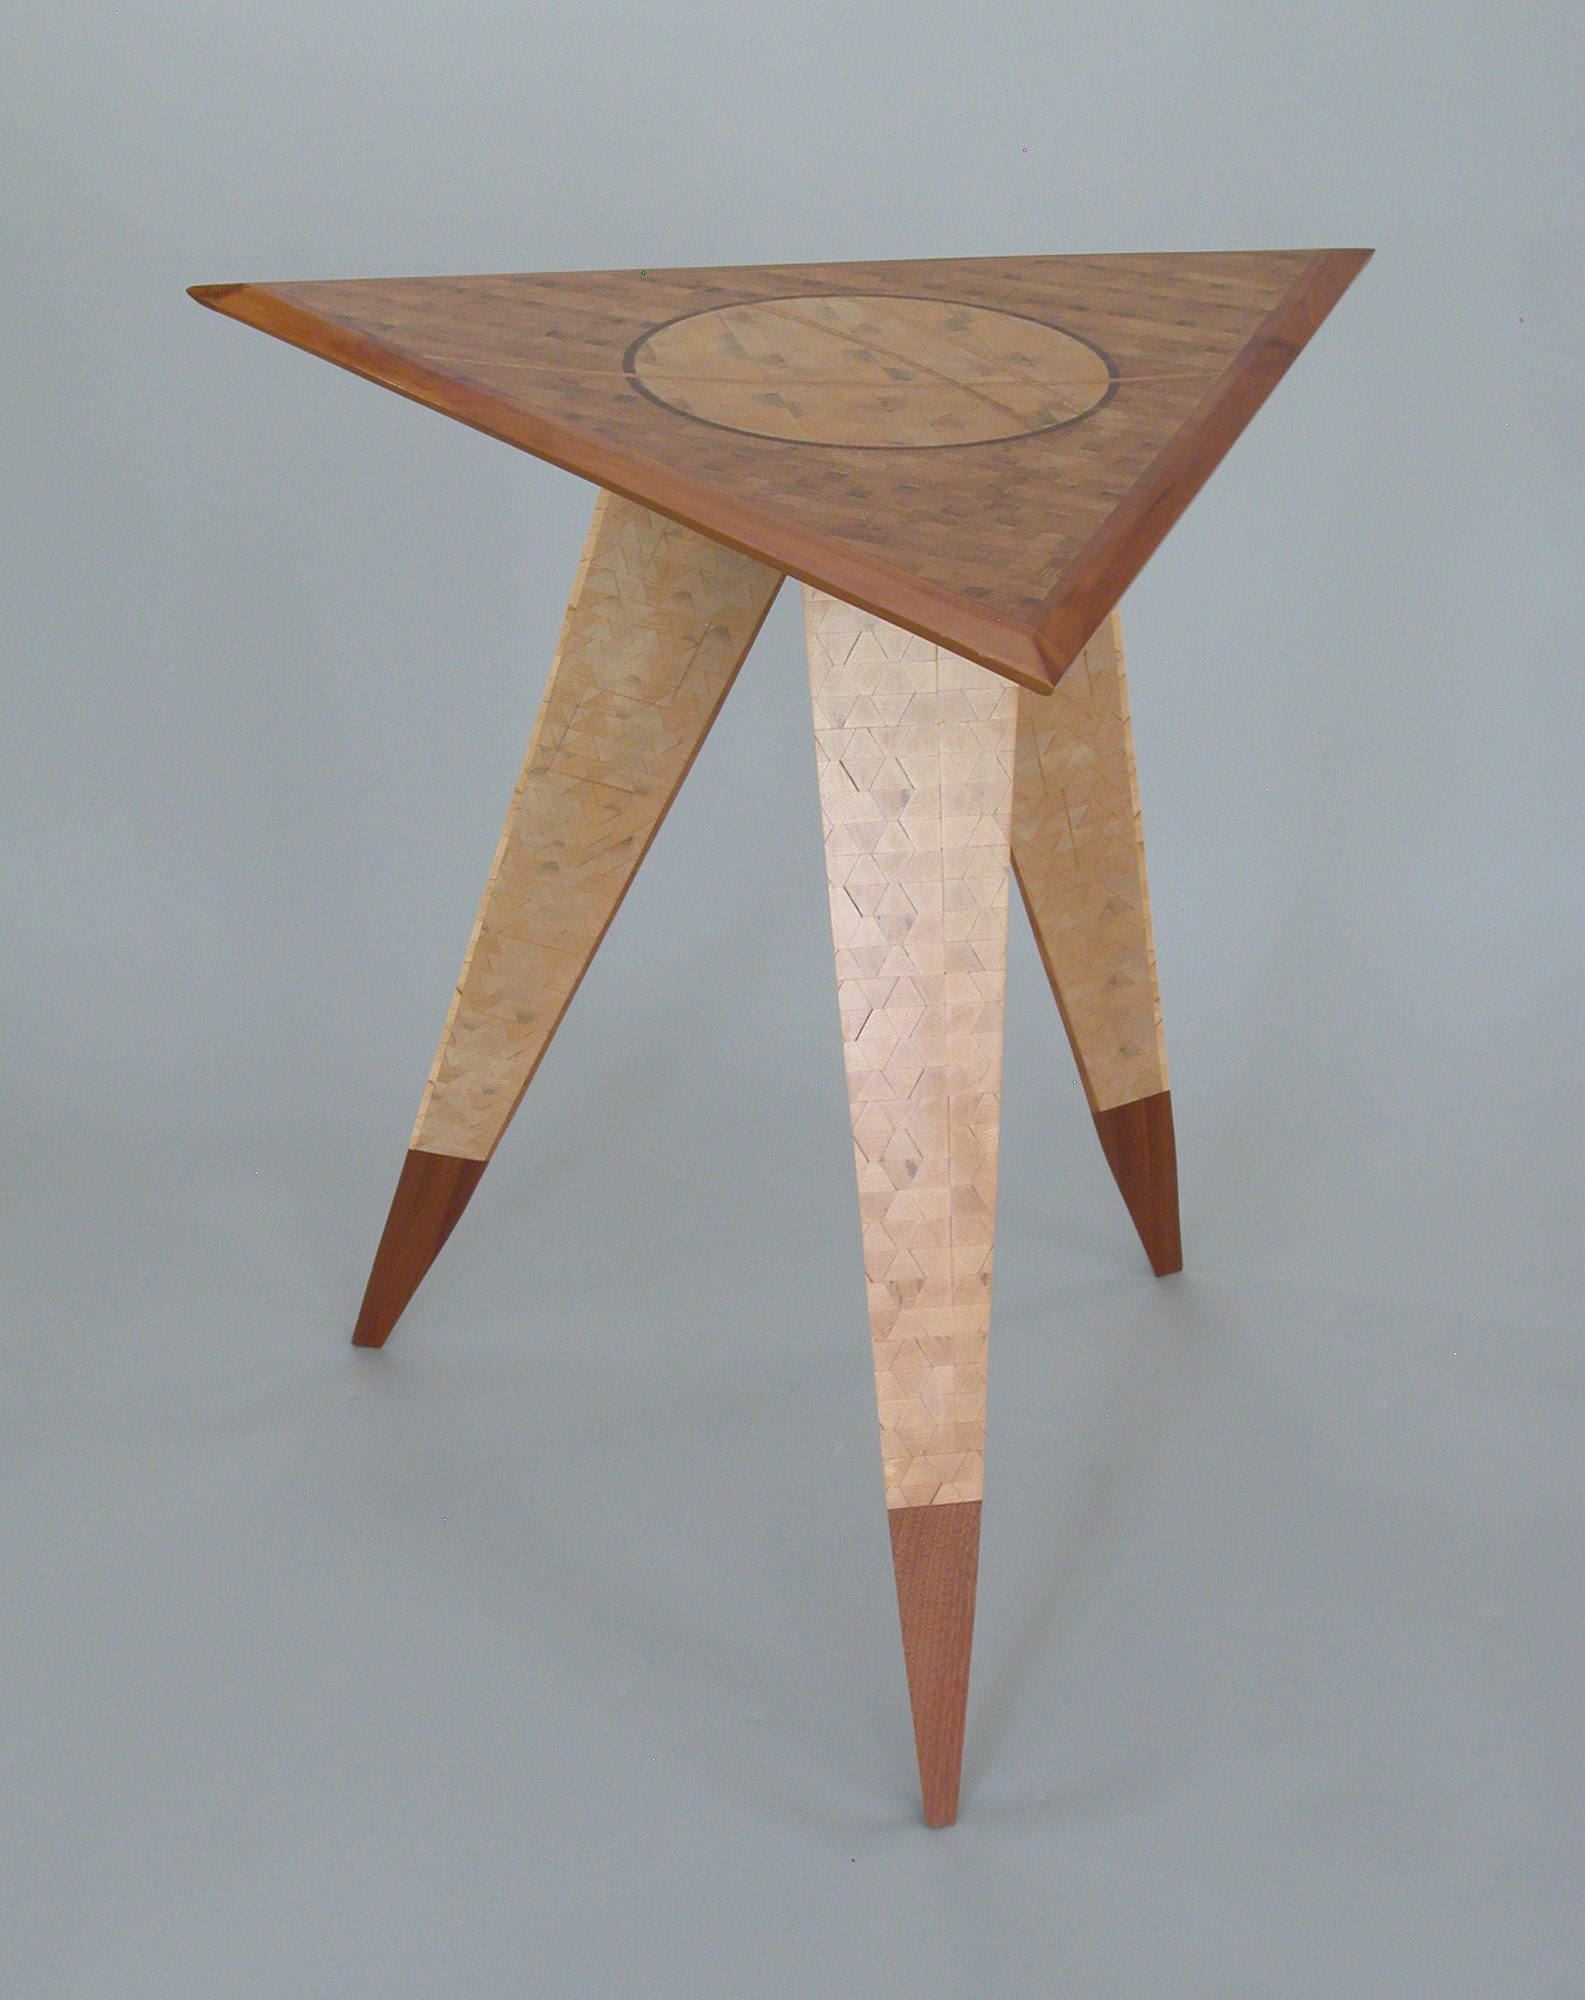 Triangle Table 2 By Charles Adams Wood, Triangle Lamp Table